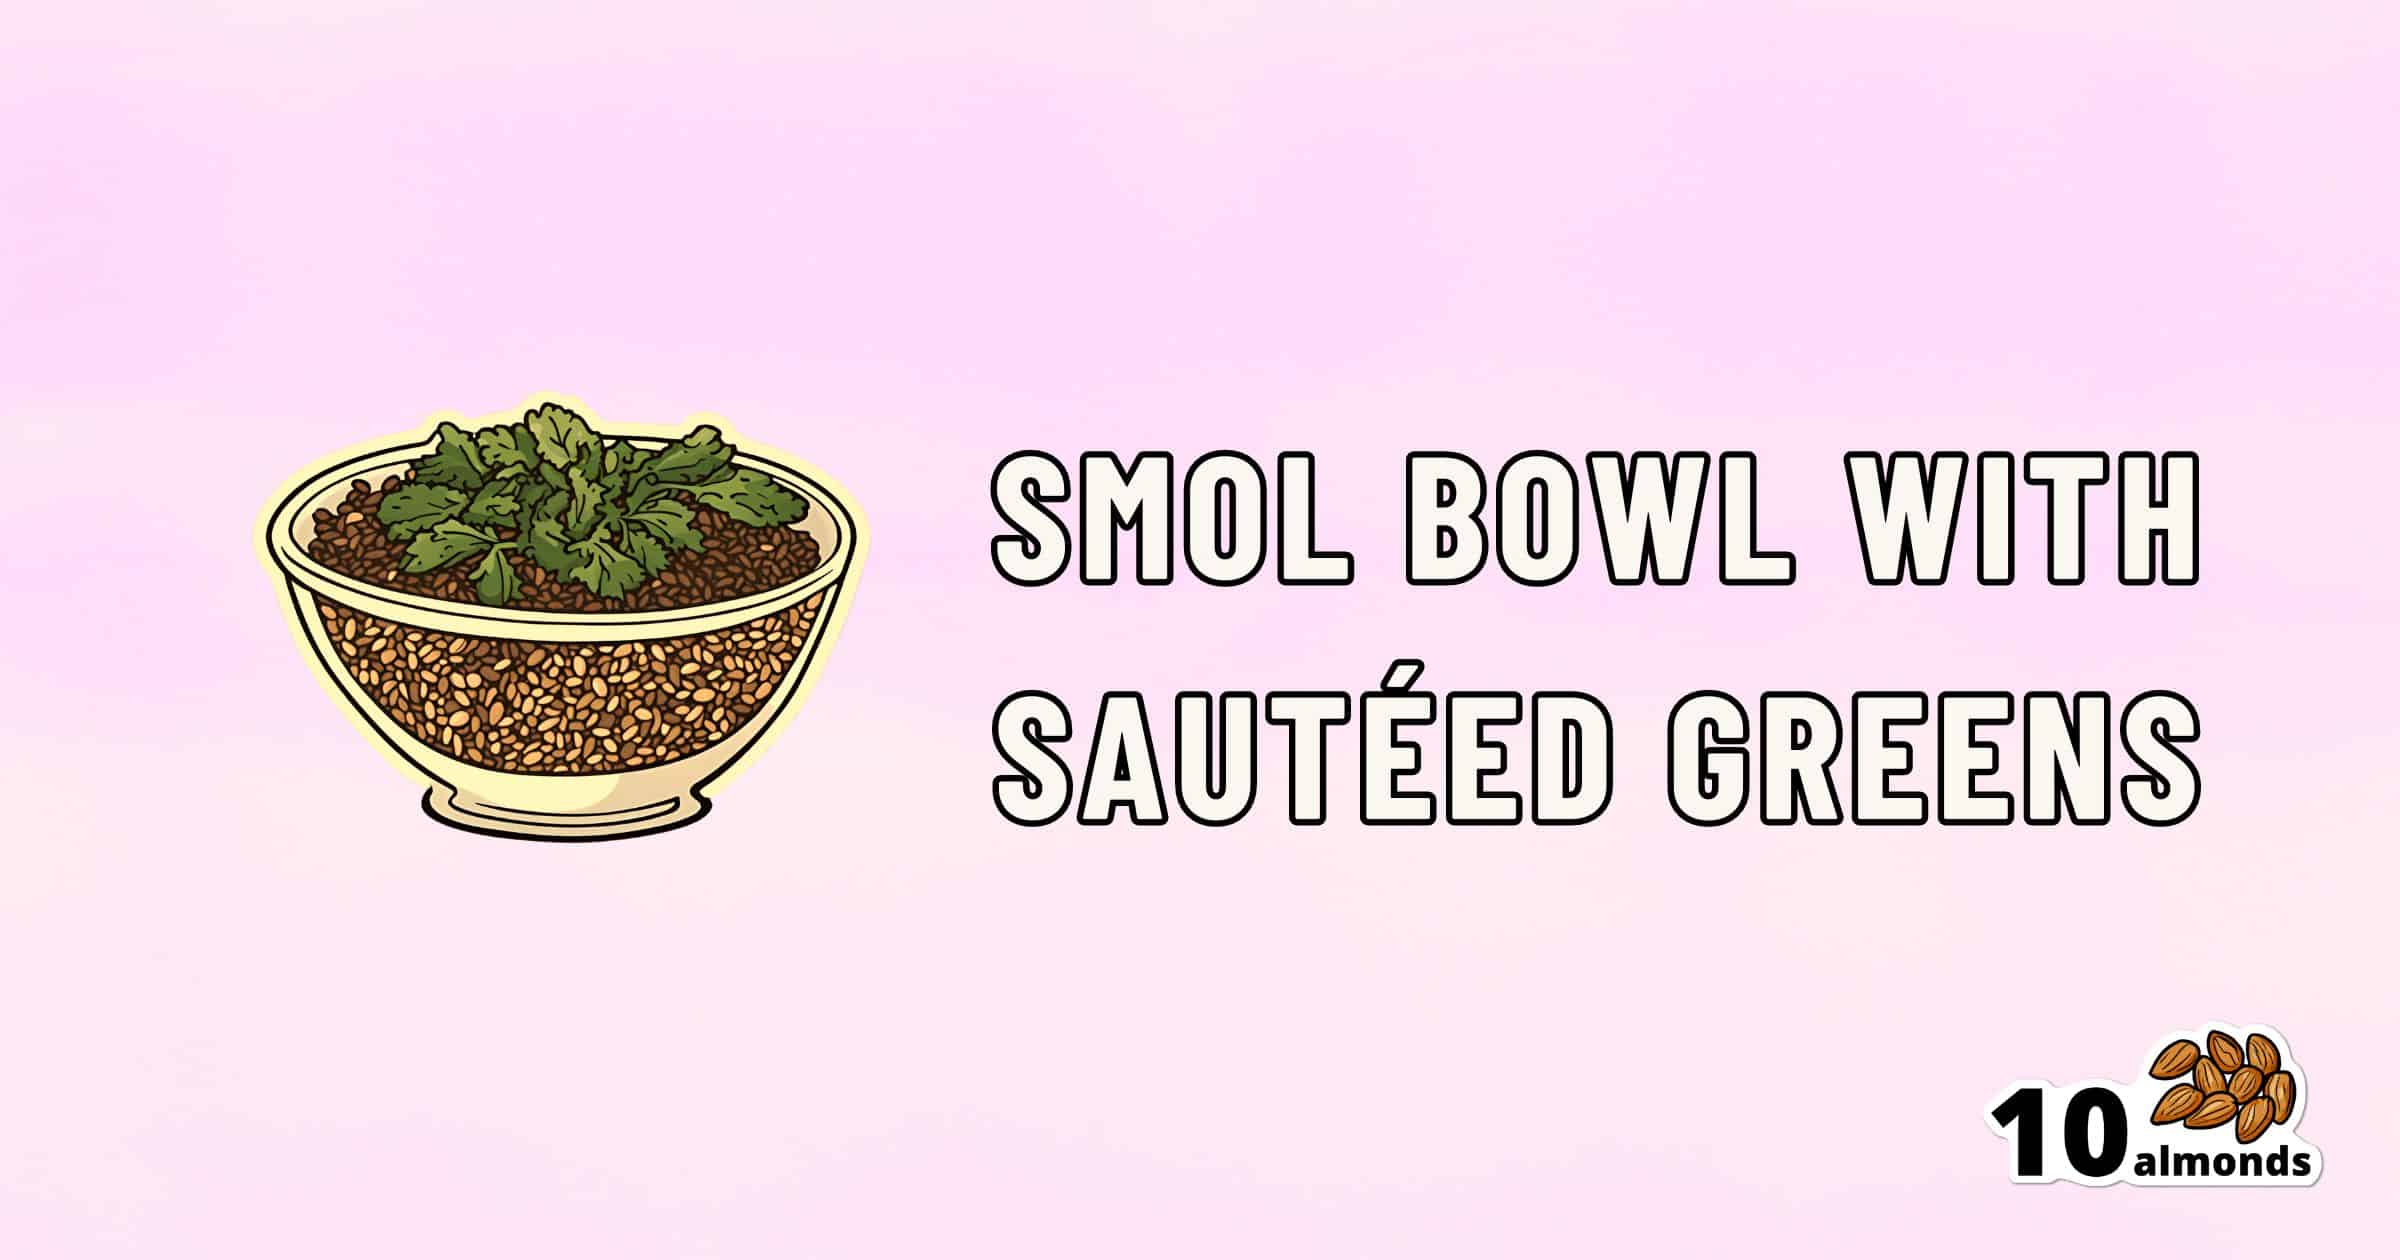 Illustration of a SMOL Bowl filled with sautéed greens and grains against a pink gradient background. Text beside the bowl reads "Smol bowl with sautéed greens." In the bottom right corner, an image of almonds is labeled "10 almonds.